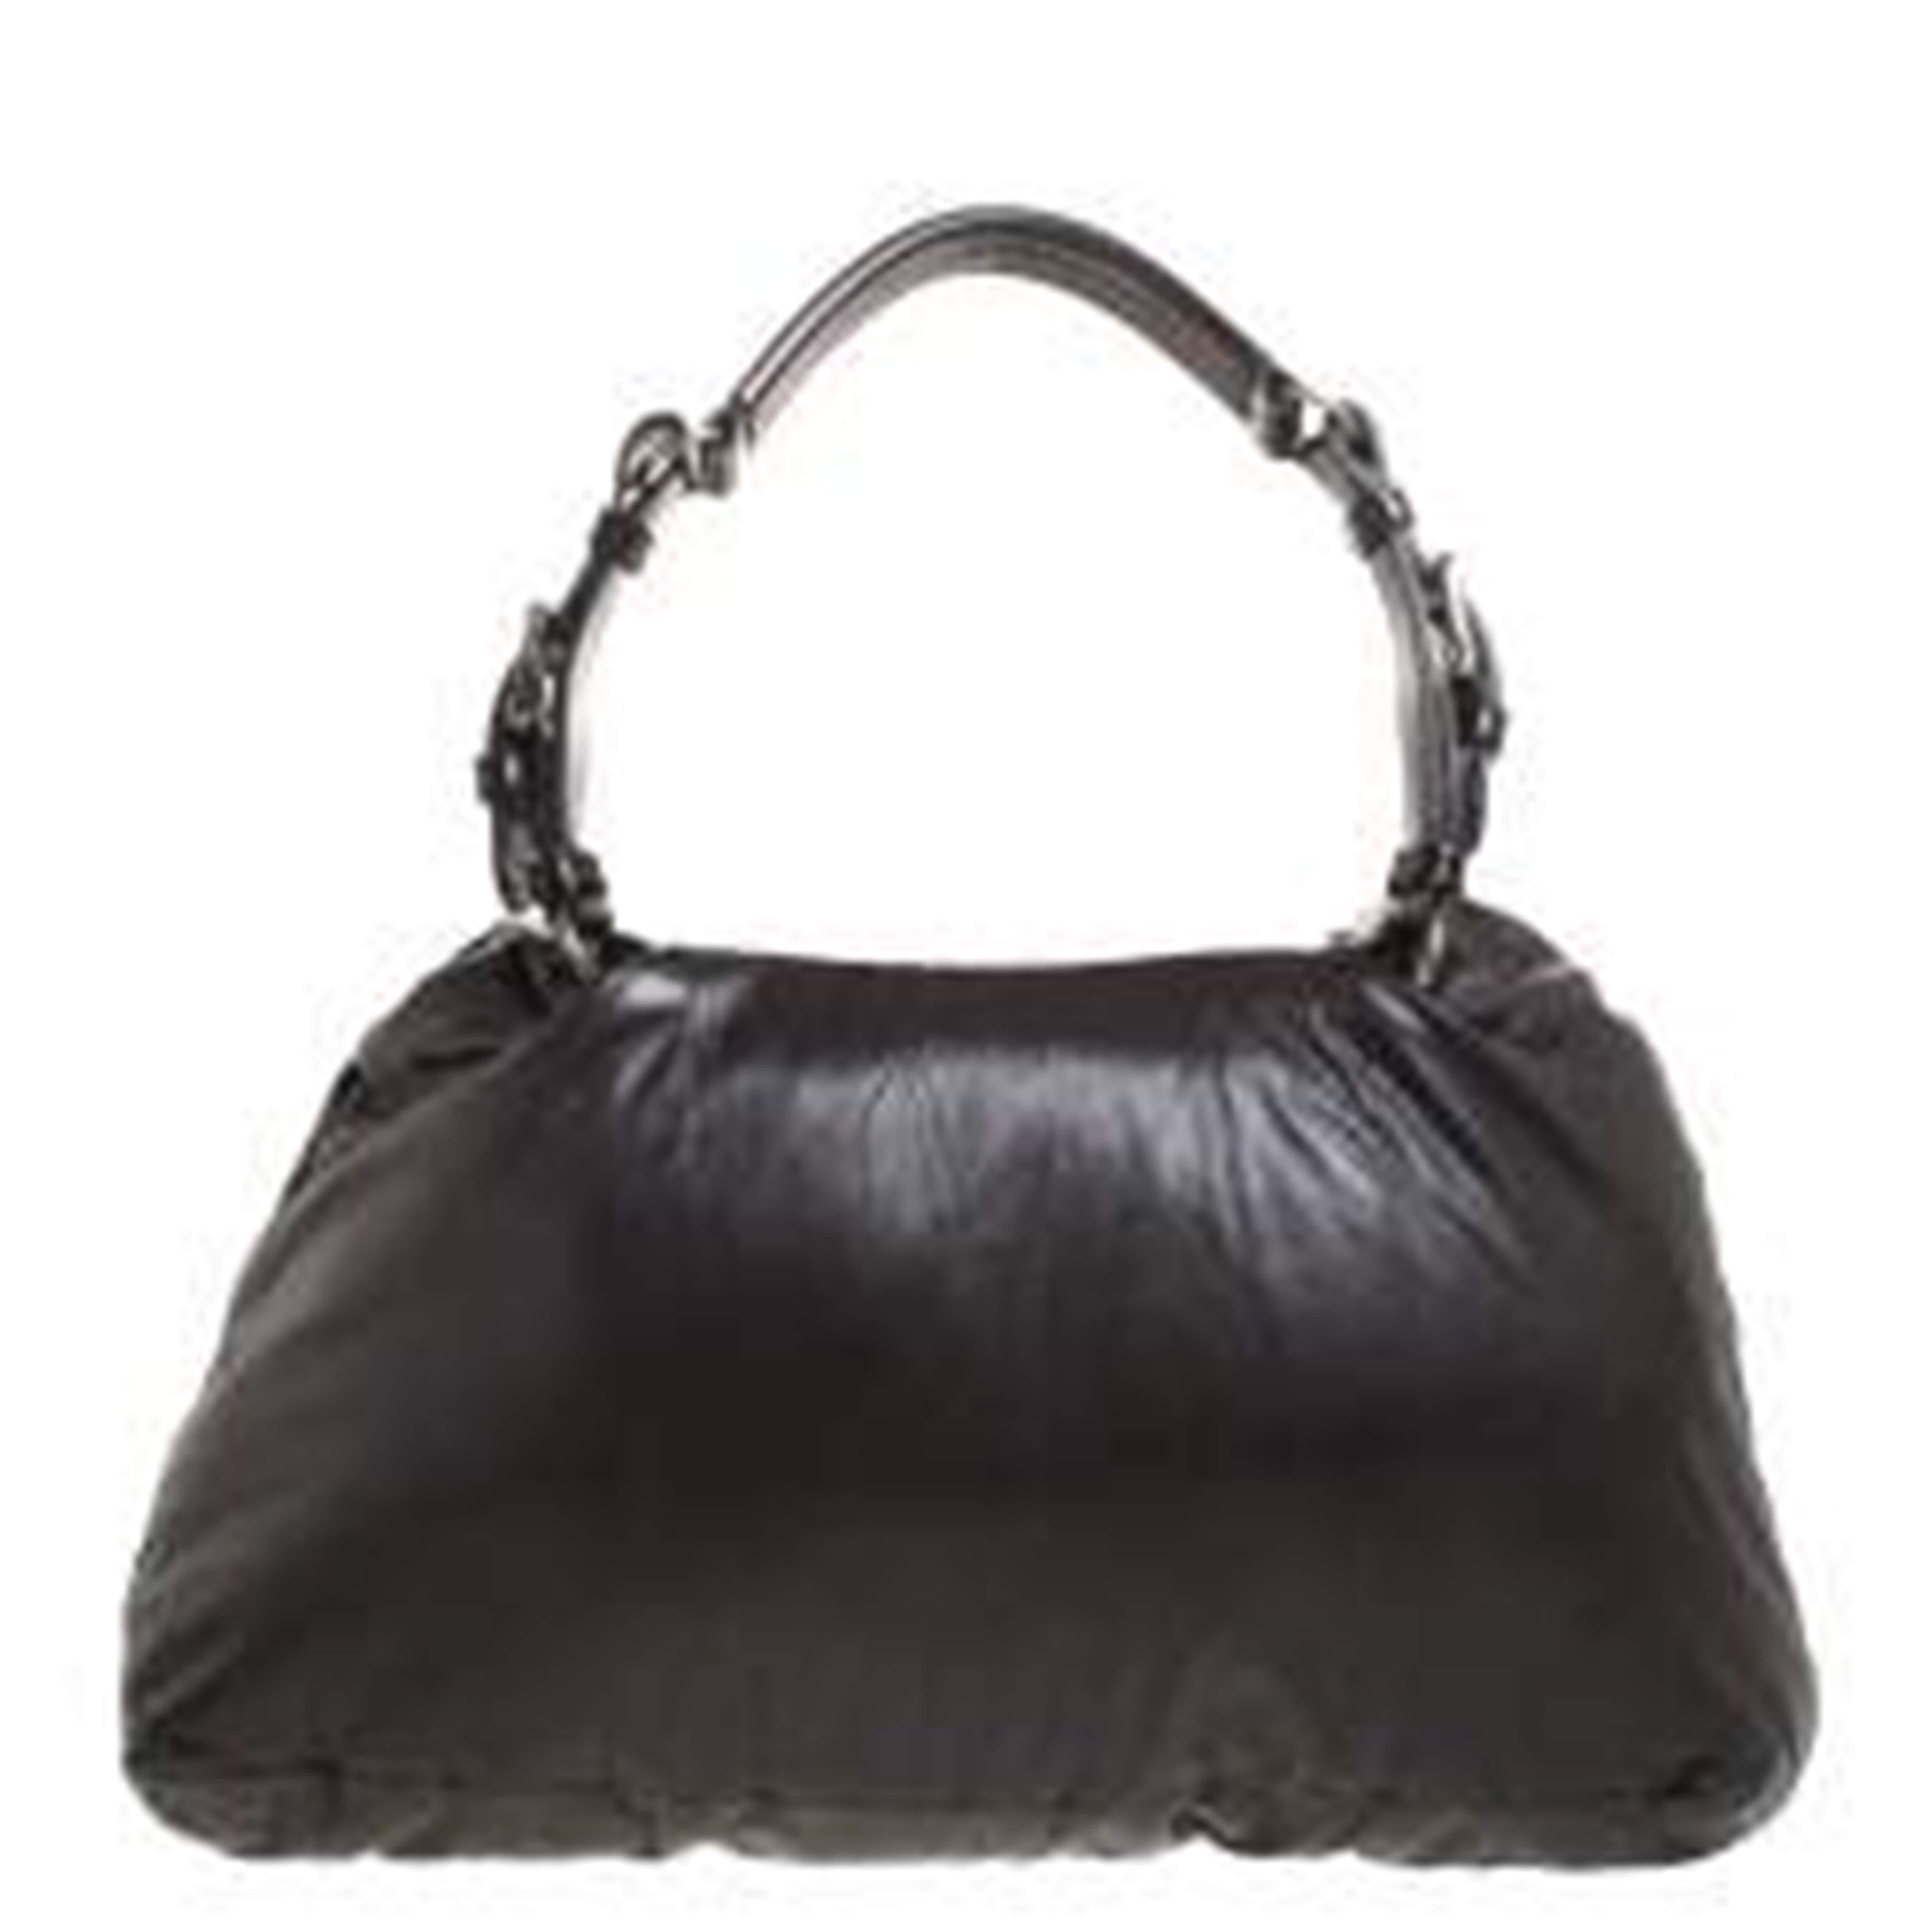 Step out swinging this amazing bag from Marni. It has been crafted from dark grey leather and styled with a frame flap. The satin-lined interior is spacious and the bag comes with a single handle. This creation can be teamed up with various outfits